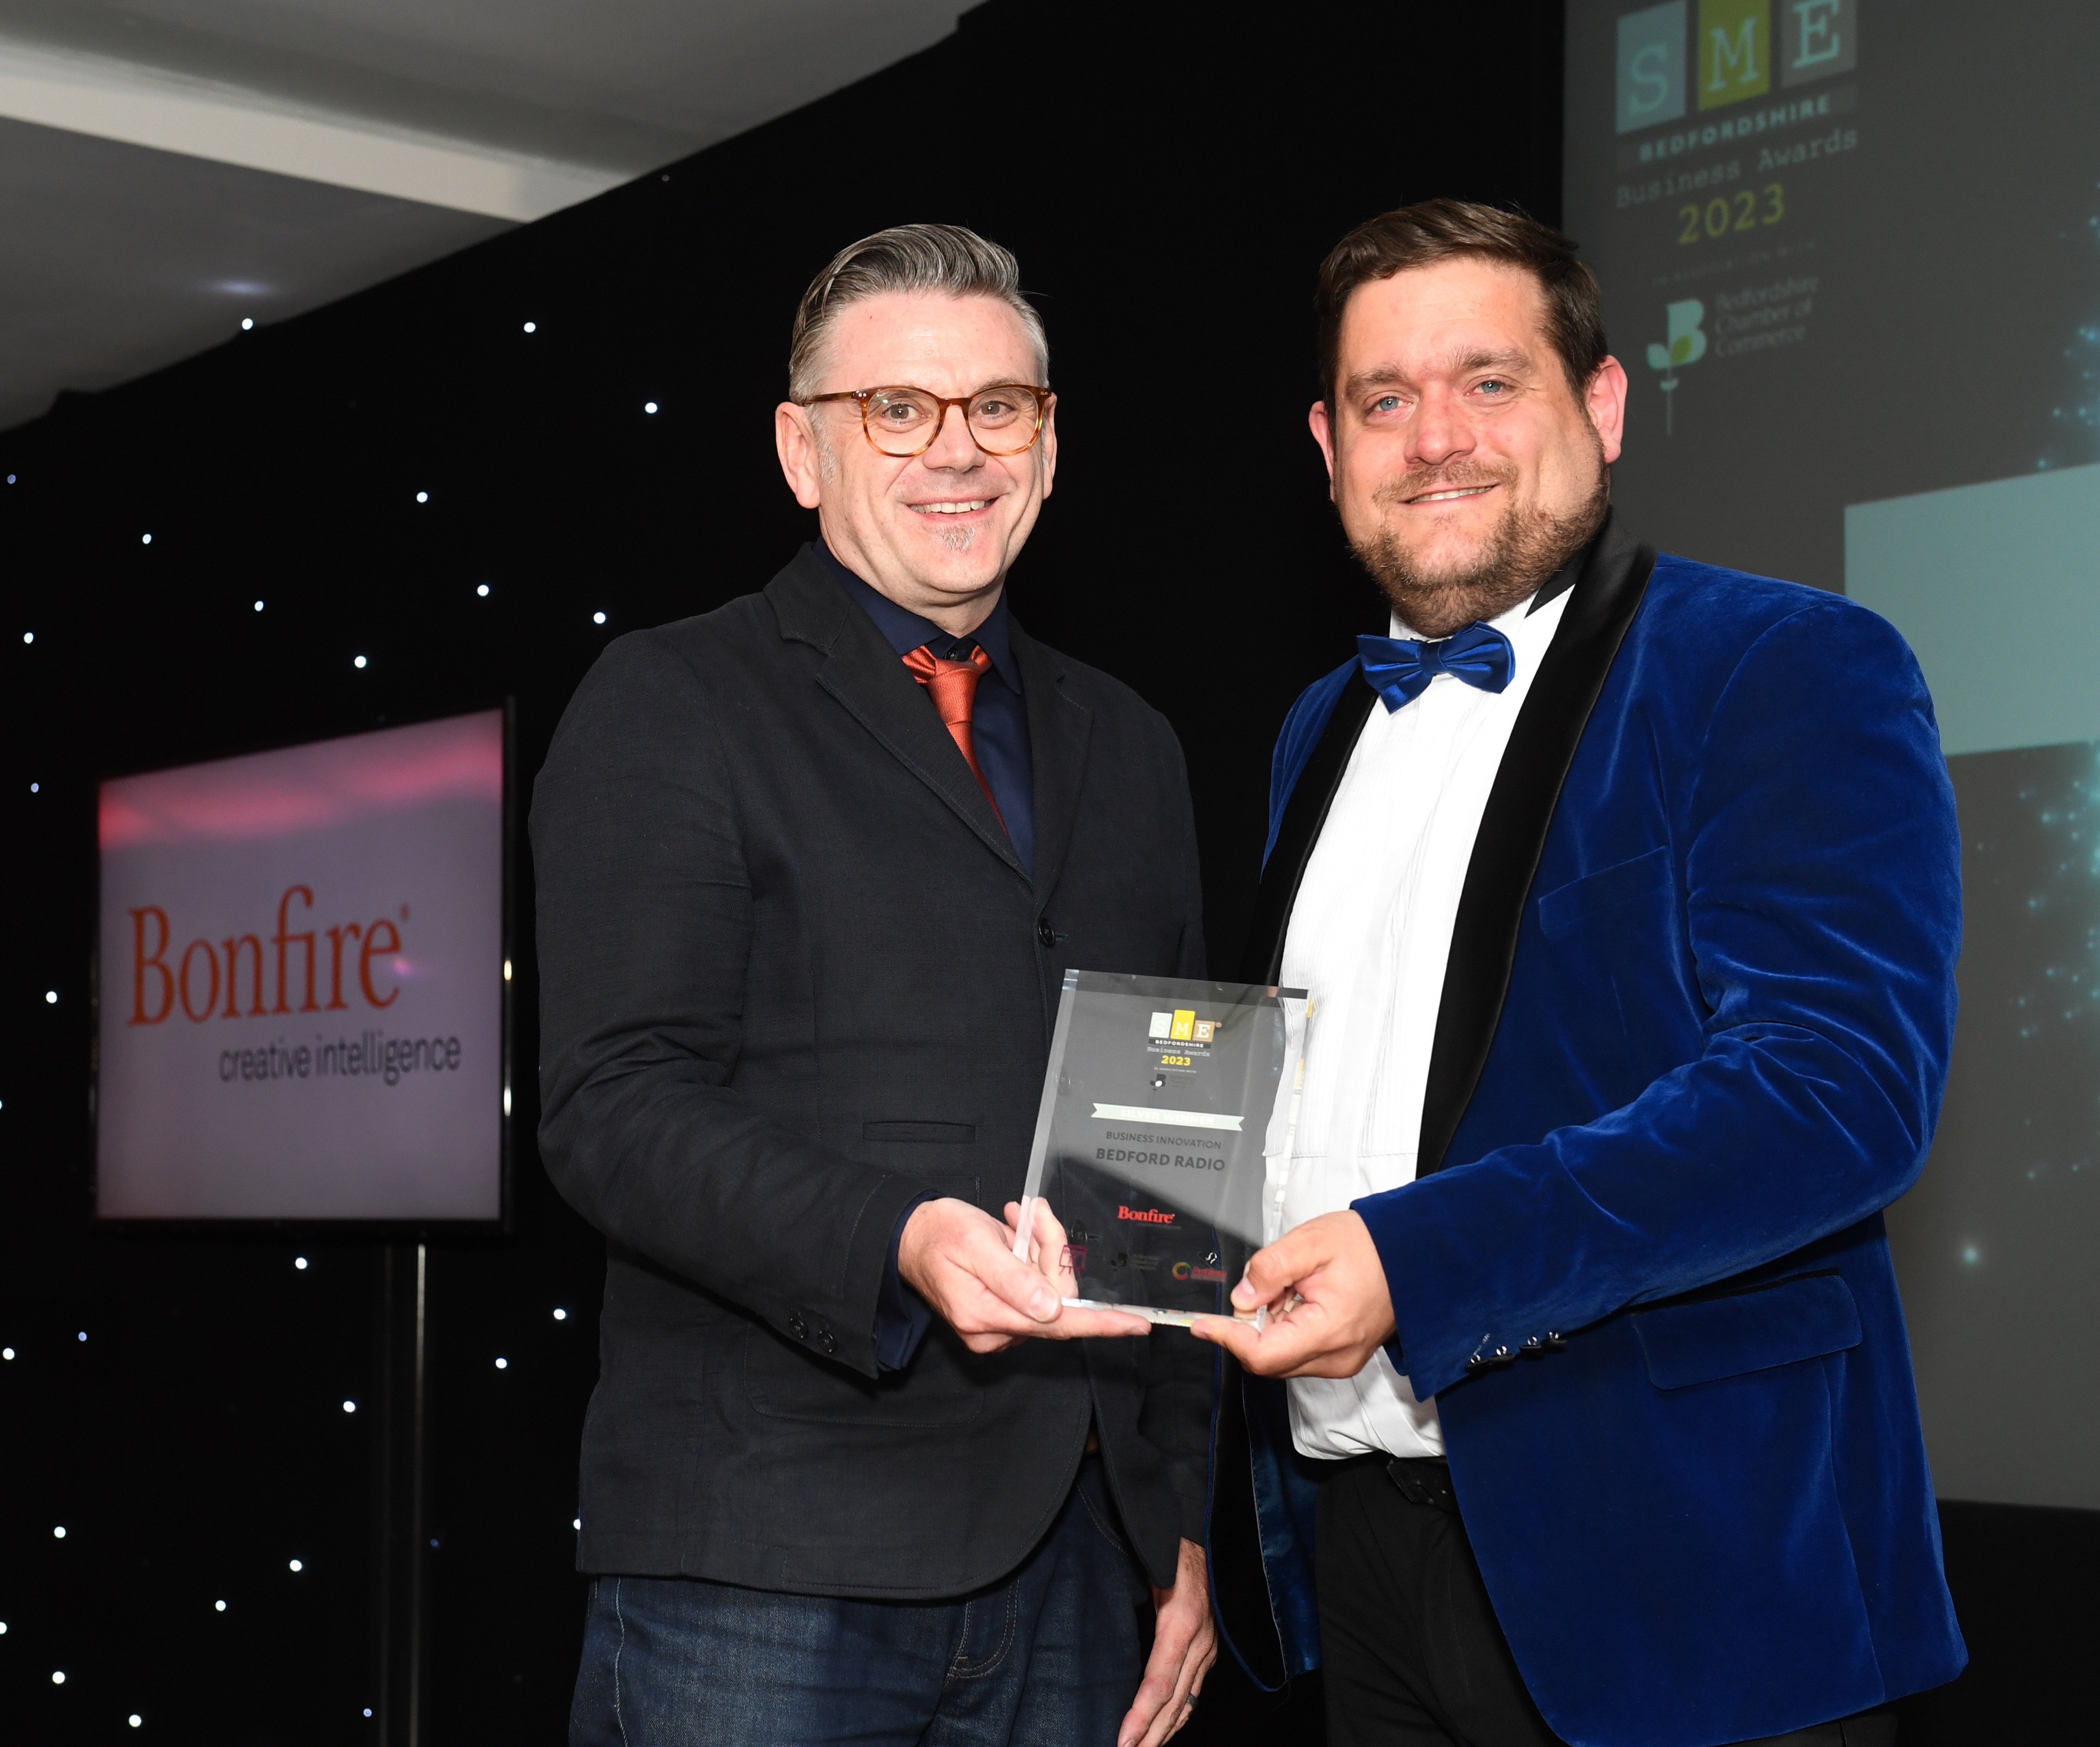 Bedford Radio Wins Silver at the SME Bedfordshire Awards for their Business Expo